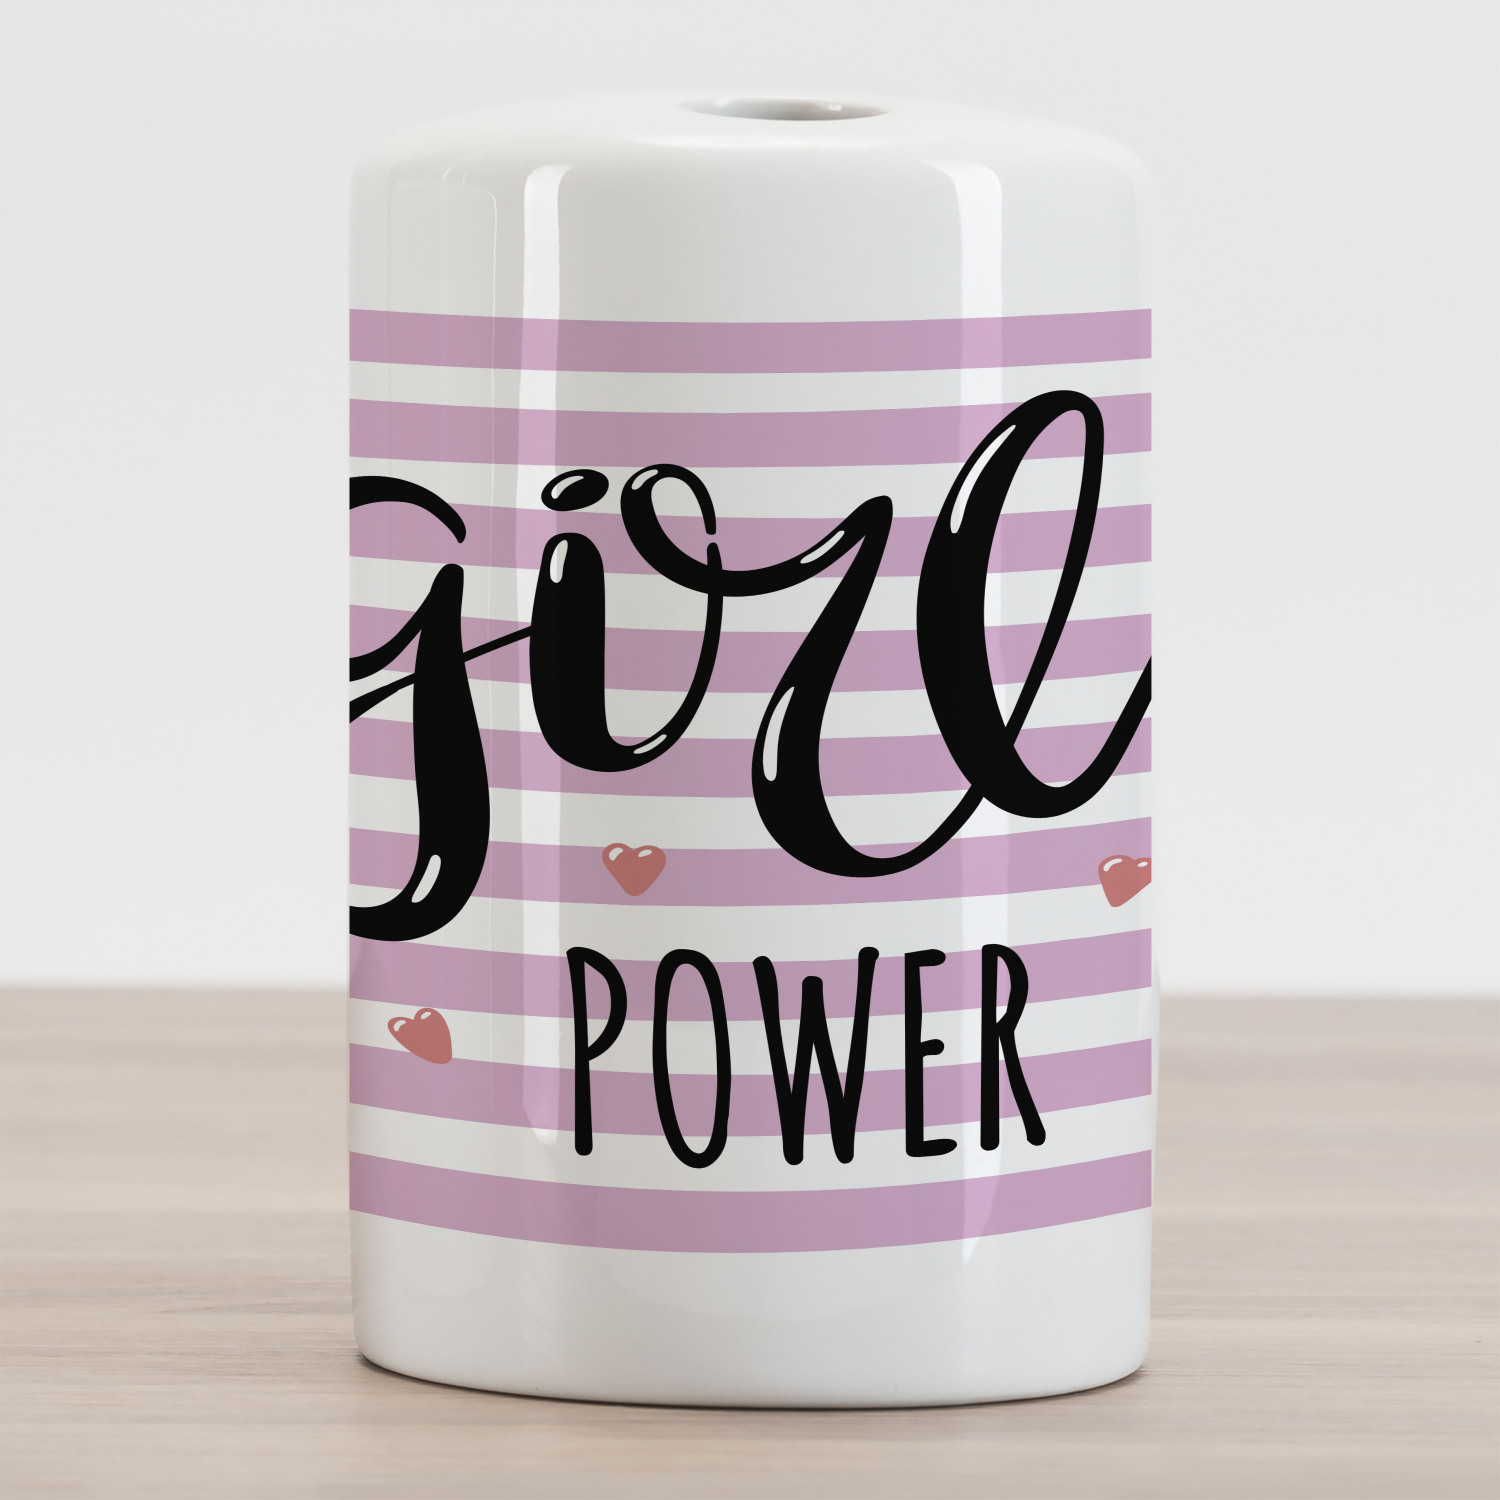 Lettering Ceramic Toothbrush Holder, Girl Power Striped Hearts Teen Motivation Feminism Strong Words, Decorative Versatile Countertop for Bathroom, 4.5" X 2.7", Pale Pink Charcoal Grey - image 2 of 4